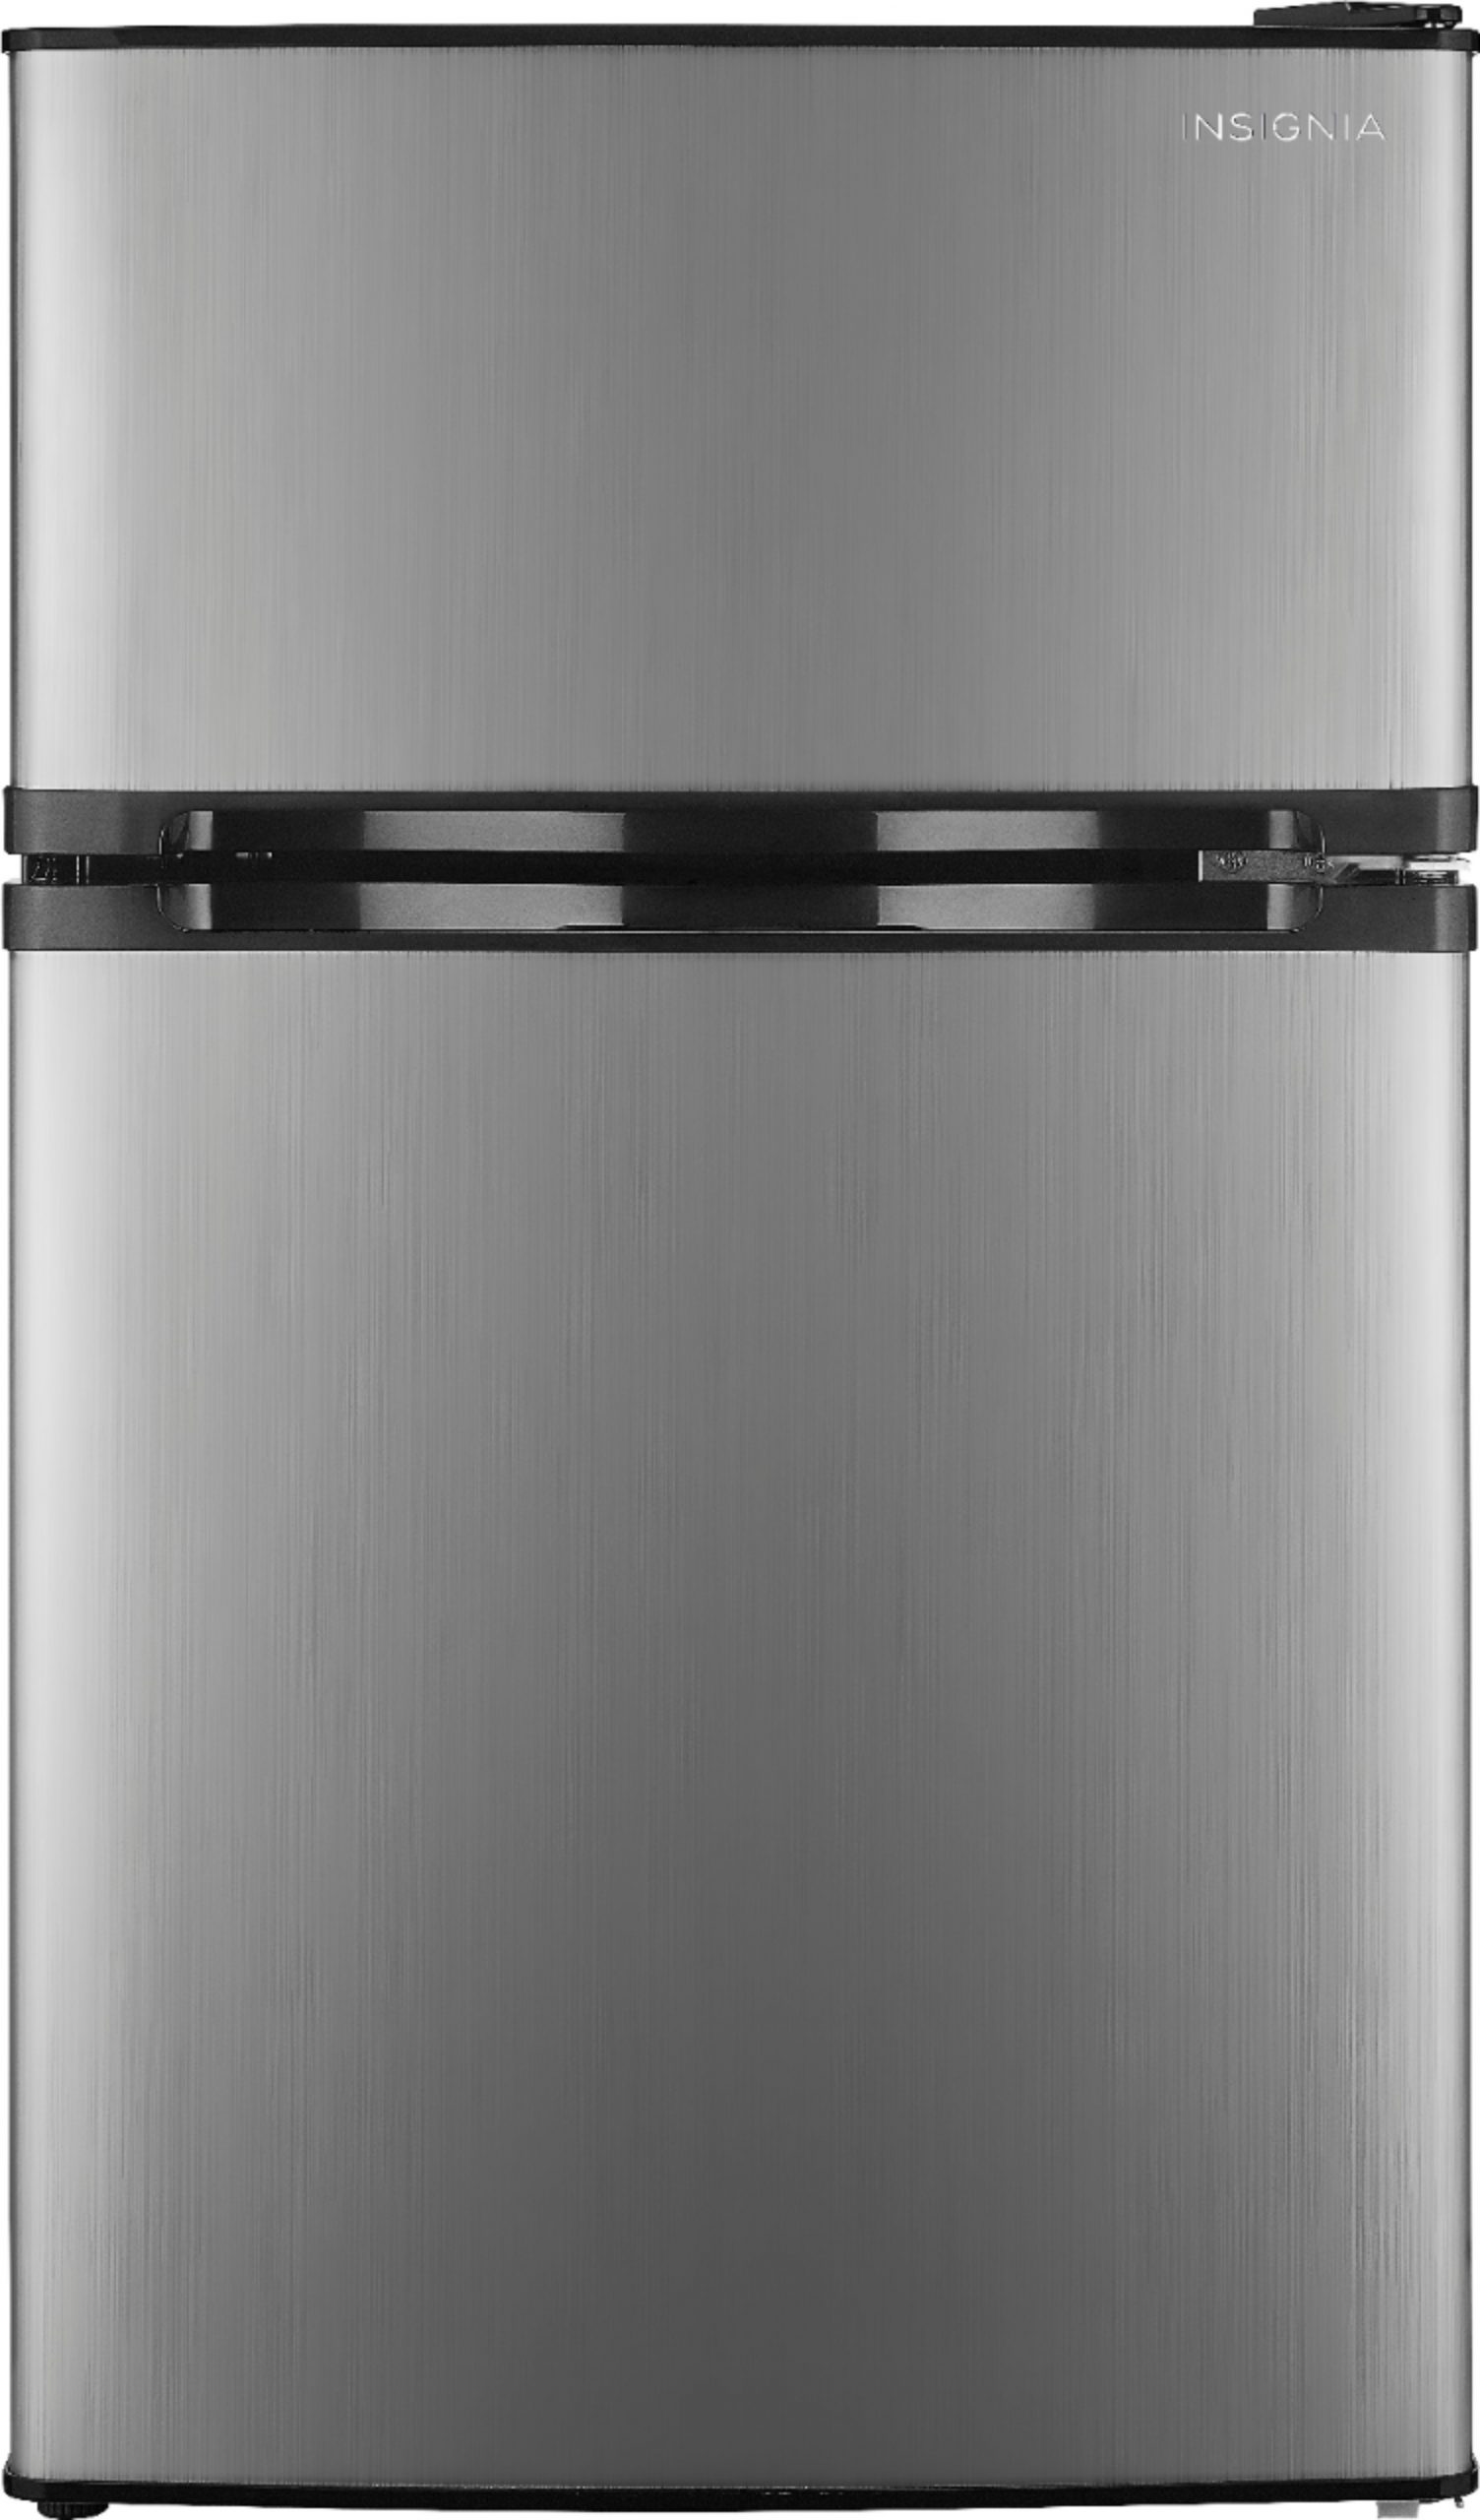 Insignia Mini Fridge with Top Freezer Early Black Friday Deal at Best Buy!